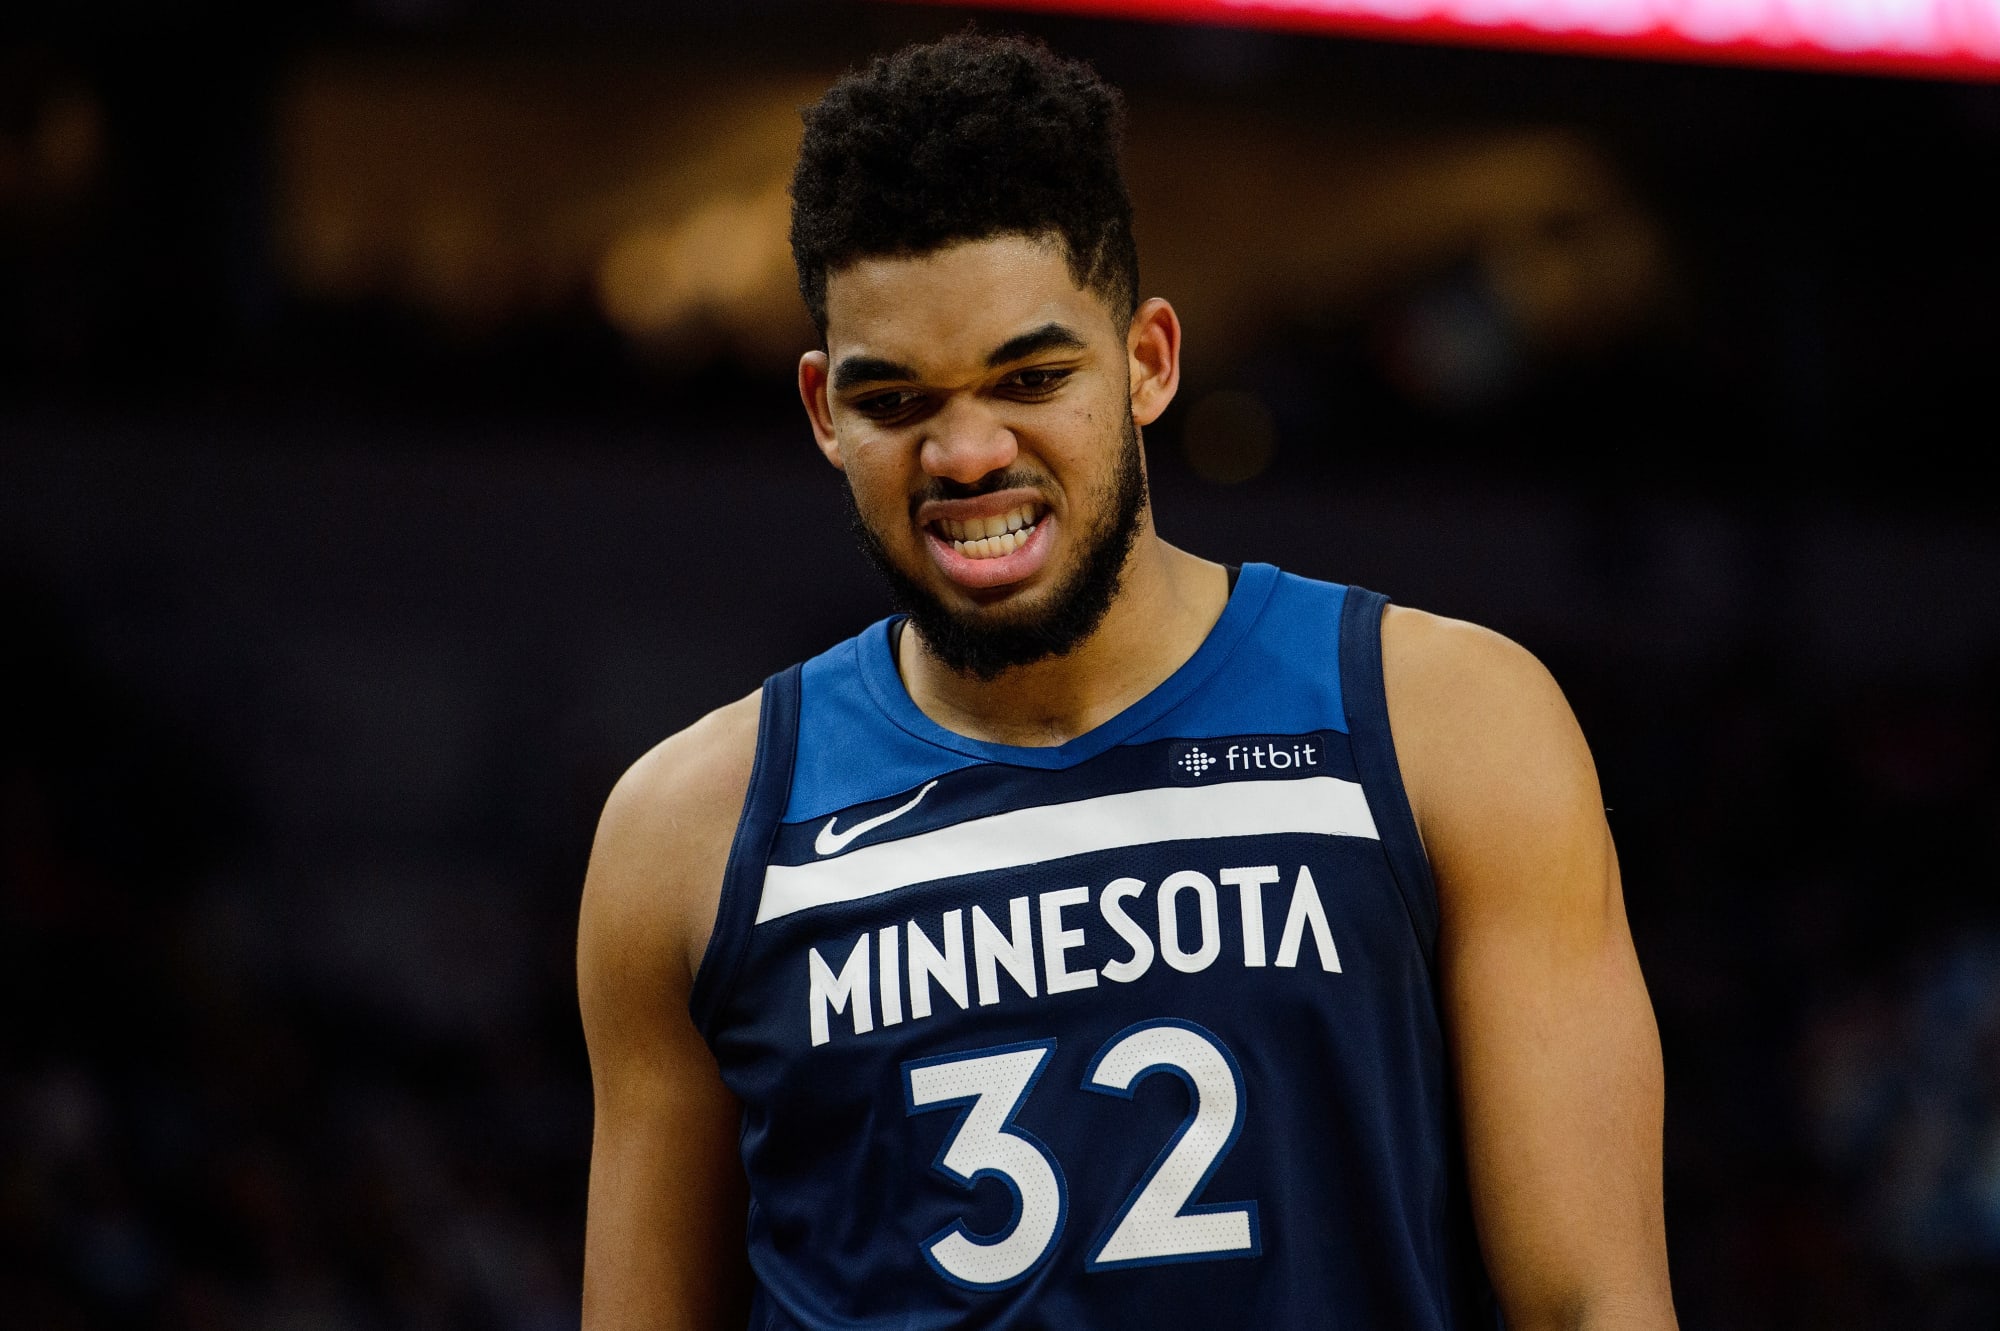 On the Minnesota Timberwolves' path to the playoffs